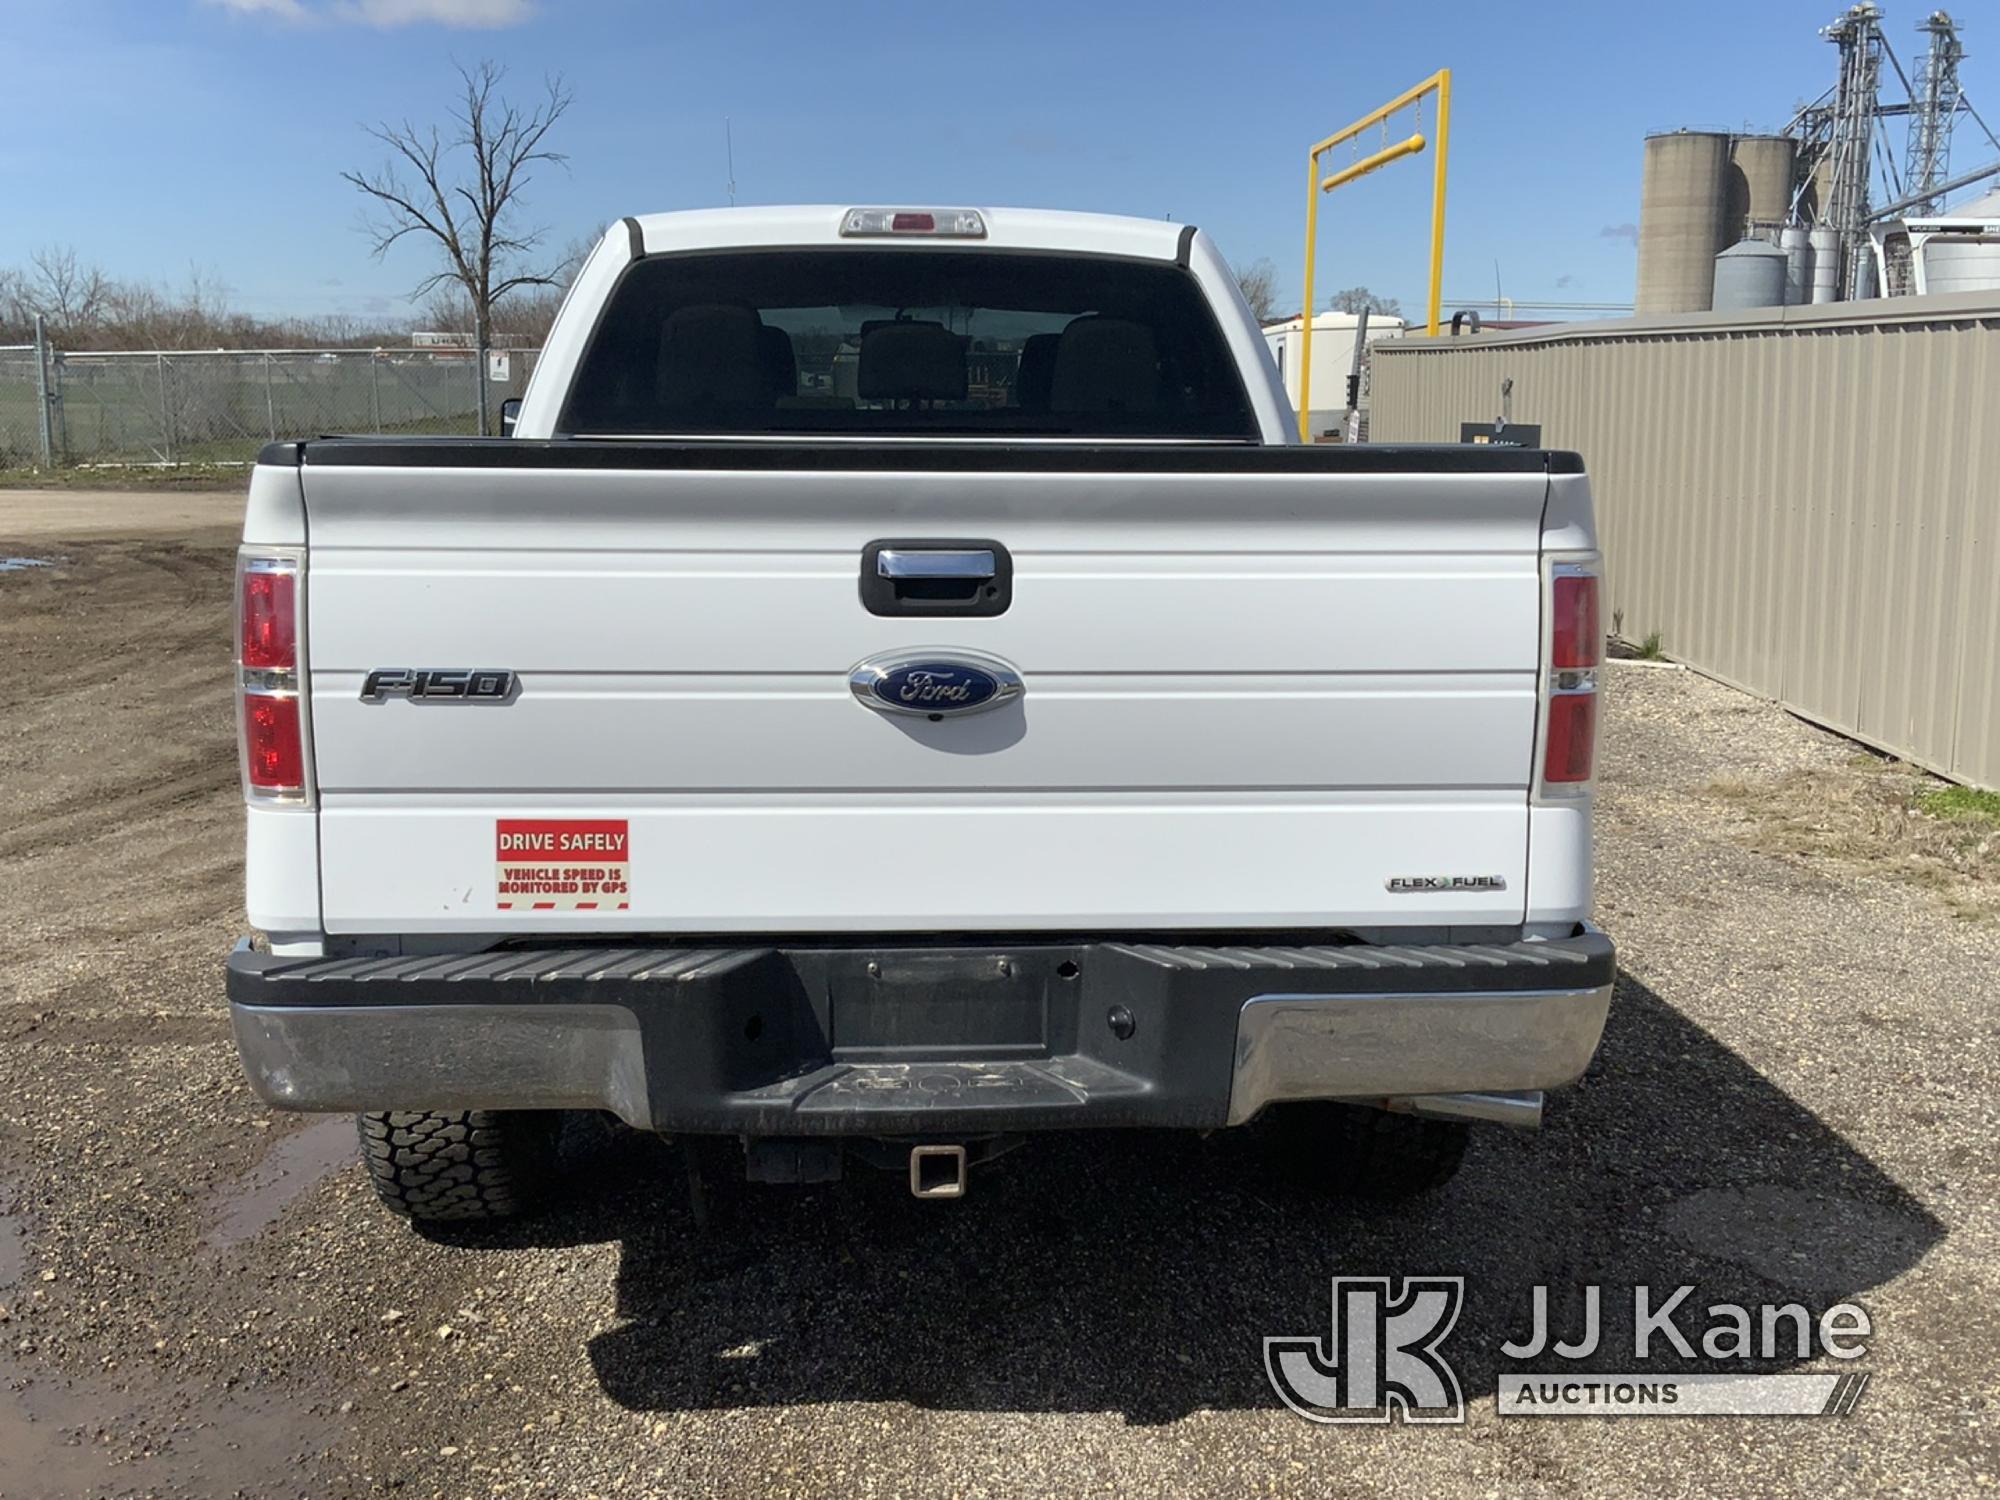 (South Beloit, IL) 2011 Ford F150 4x4 Extended-Cab Pickup Truck Runs & Moves